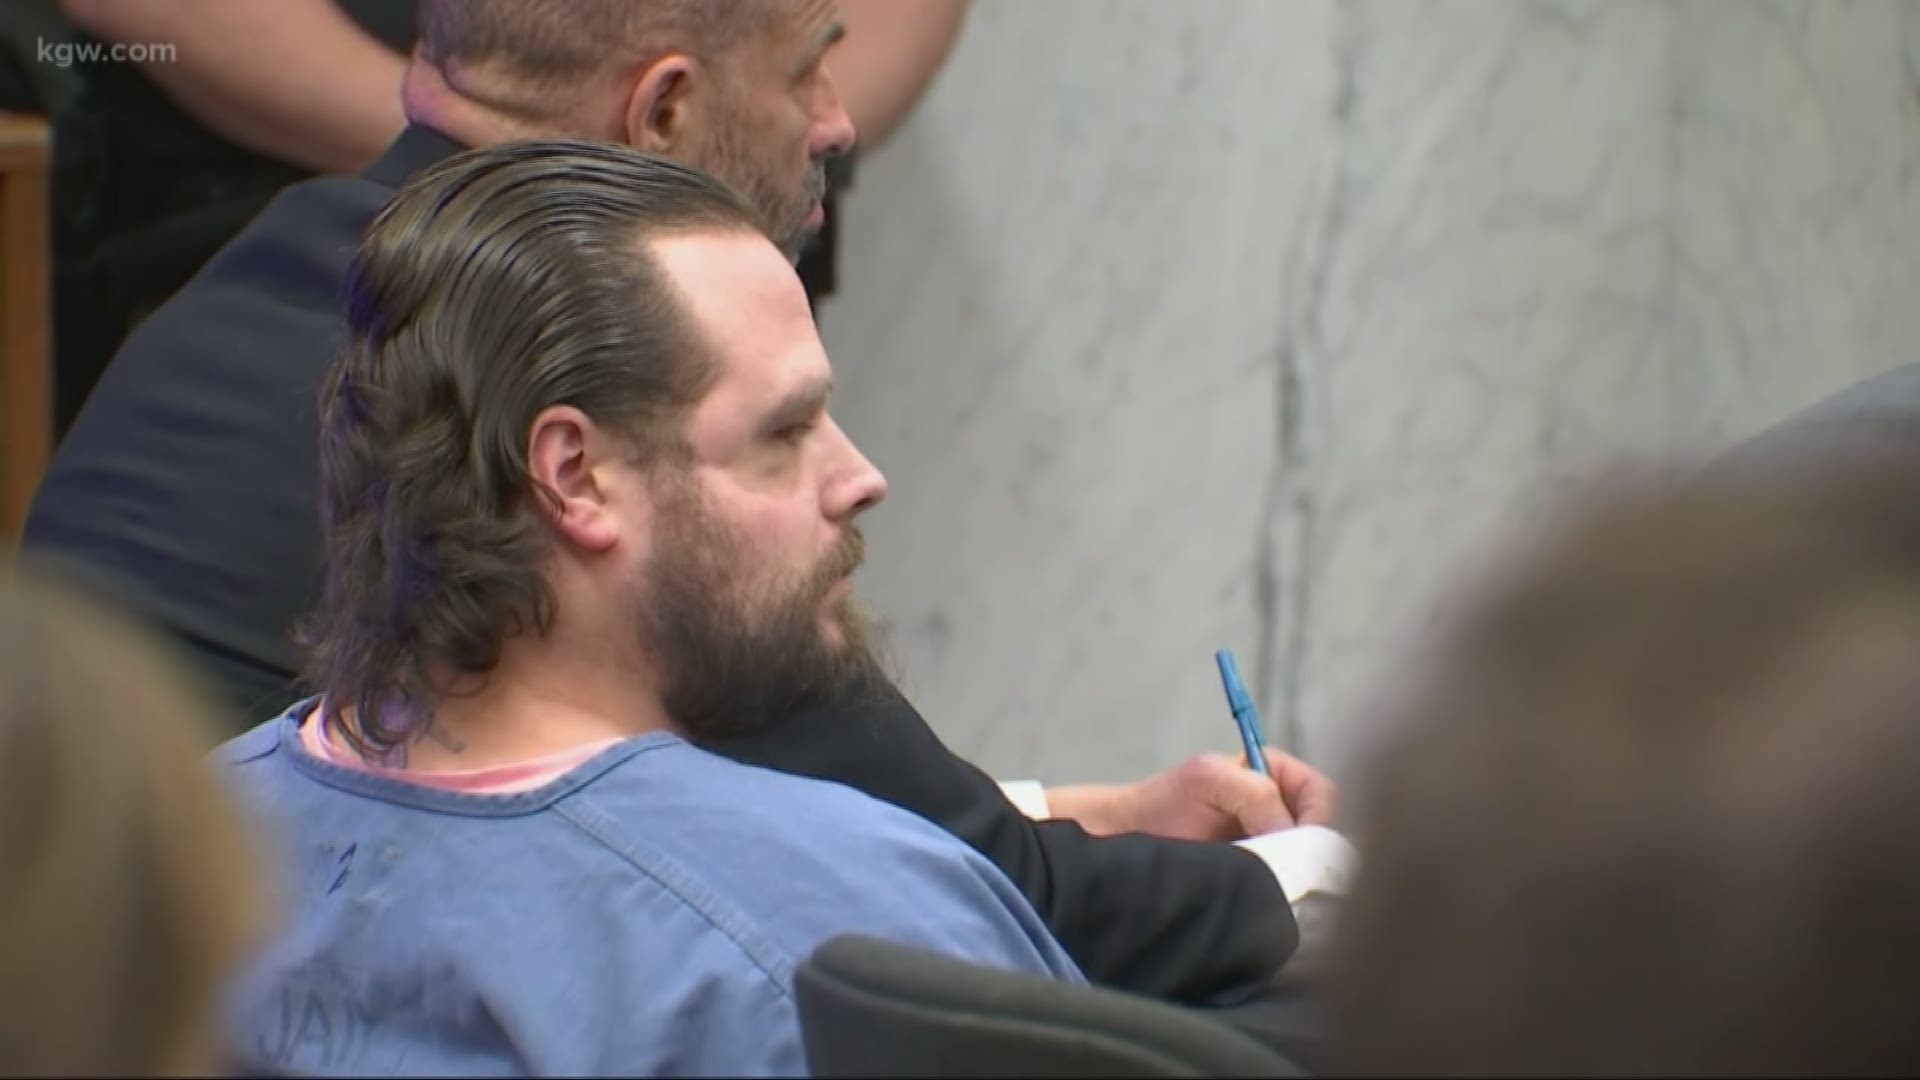 A jury unanimously found Jeremy Christian guilty on all charges in the May 26, 2017 MAX stabbing attack that killed two people.